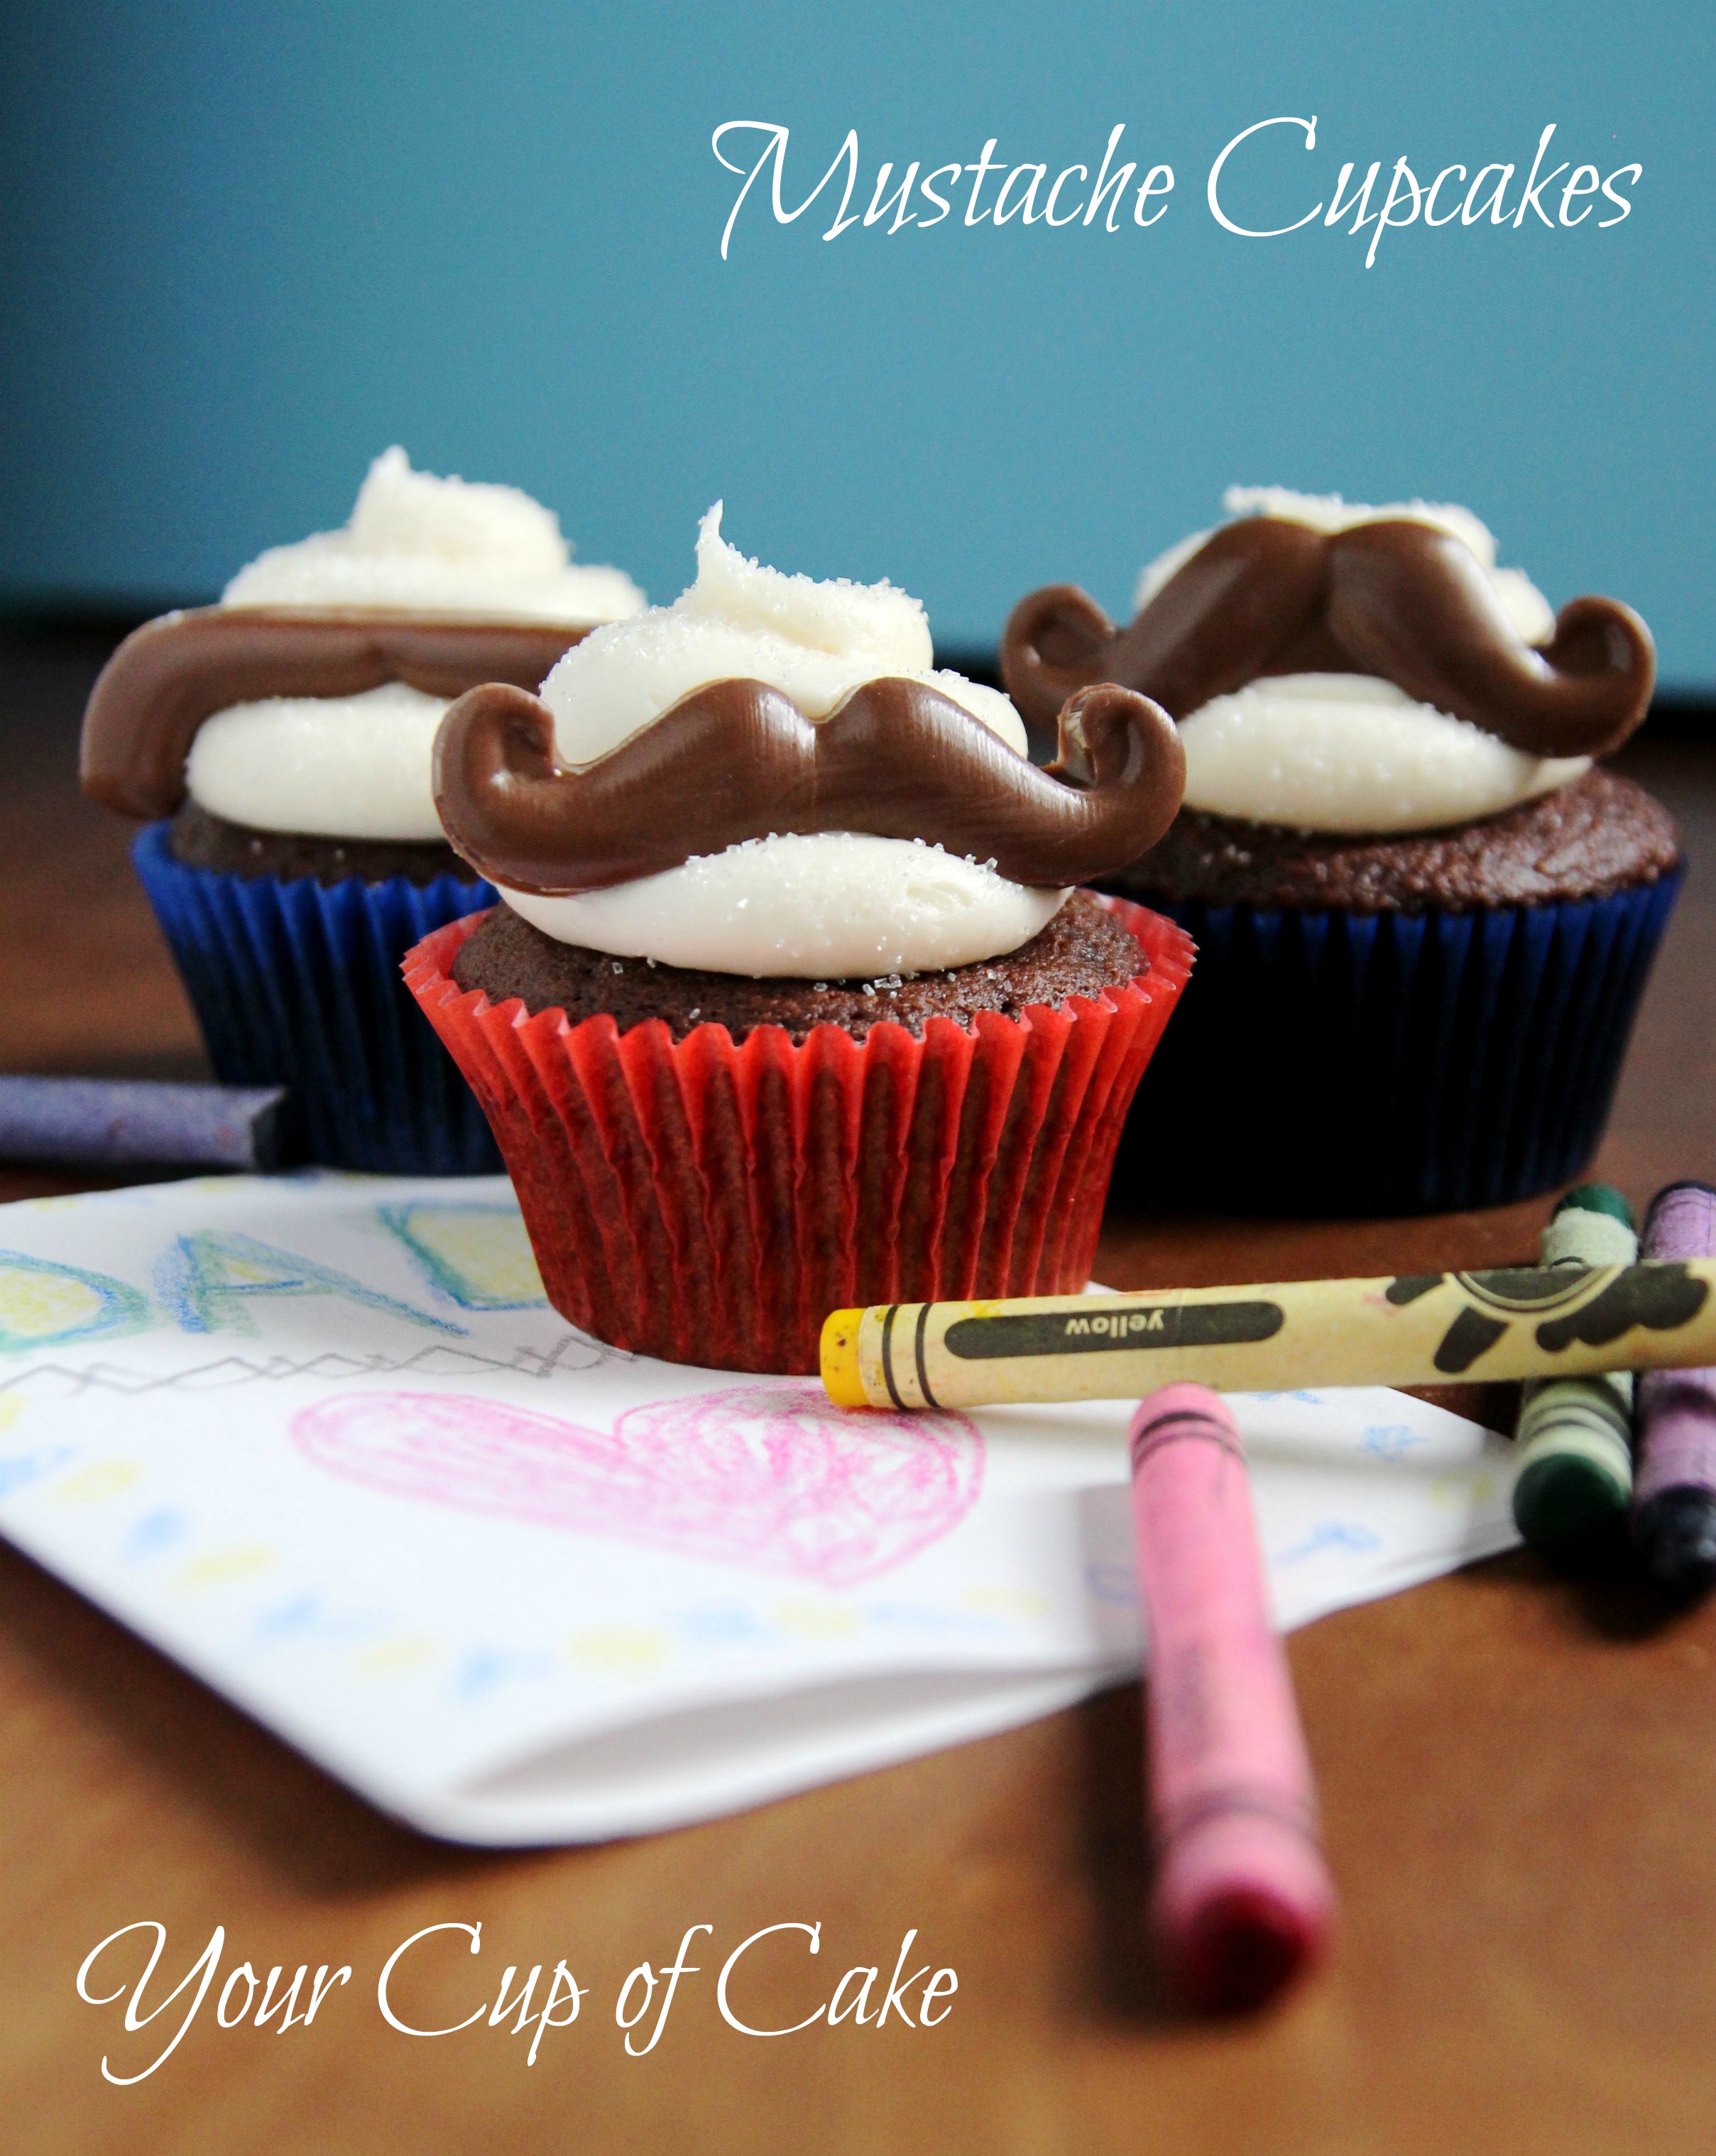 The Simple Cake: Mustache Cakes